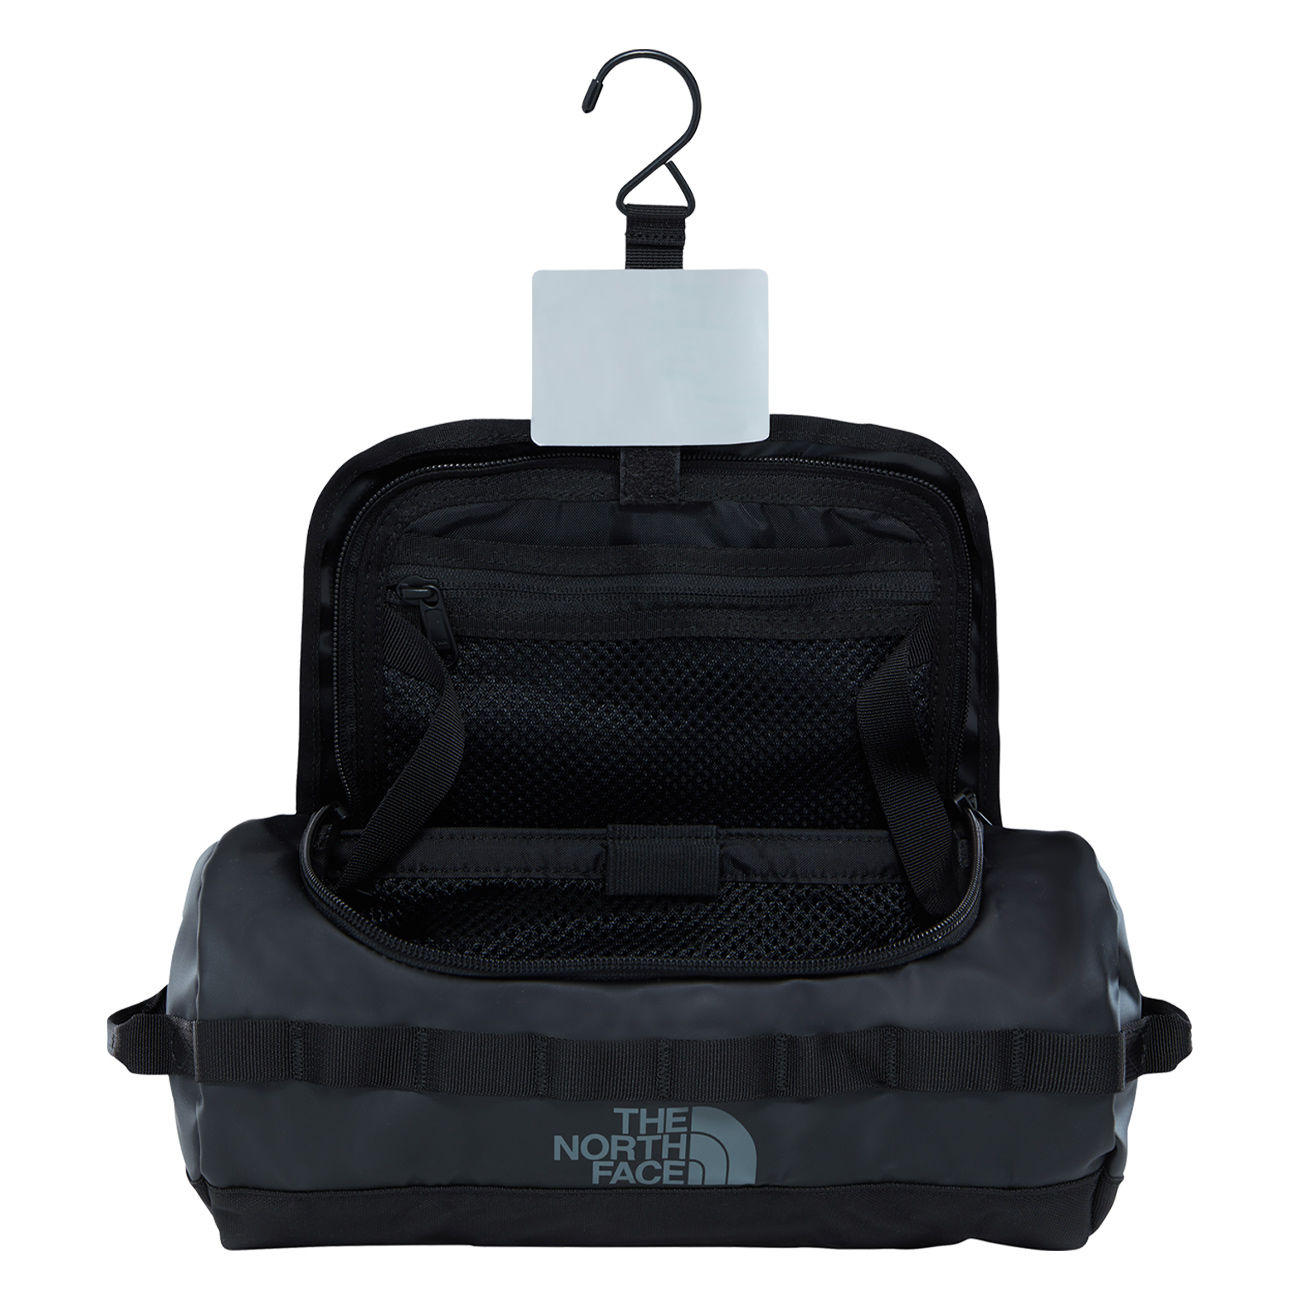 move on tired Prophet THE NORTH FACE TRAVEL BEAUTY CASE BASE CAMP L Black | Mascheroni Store